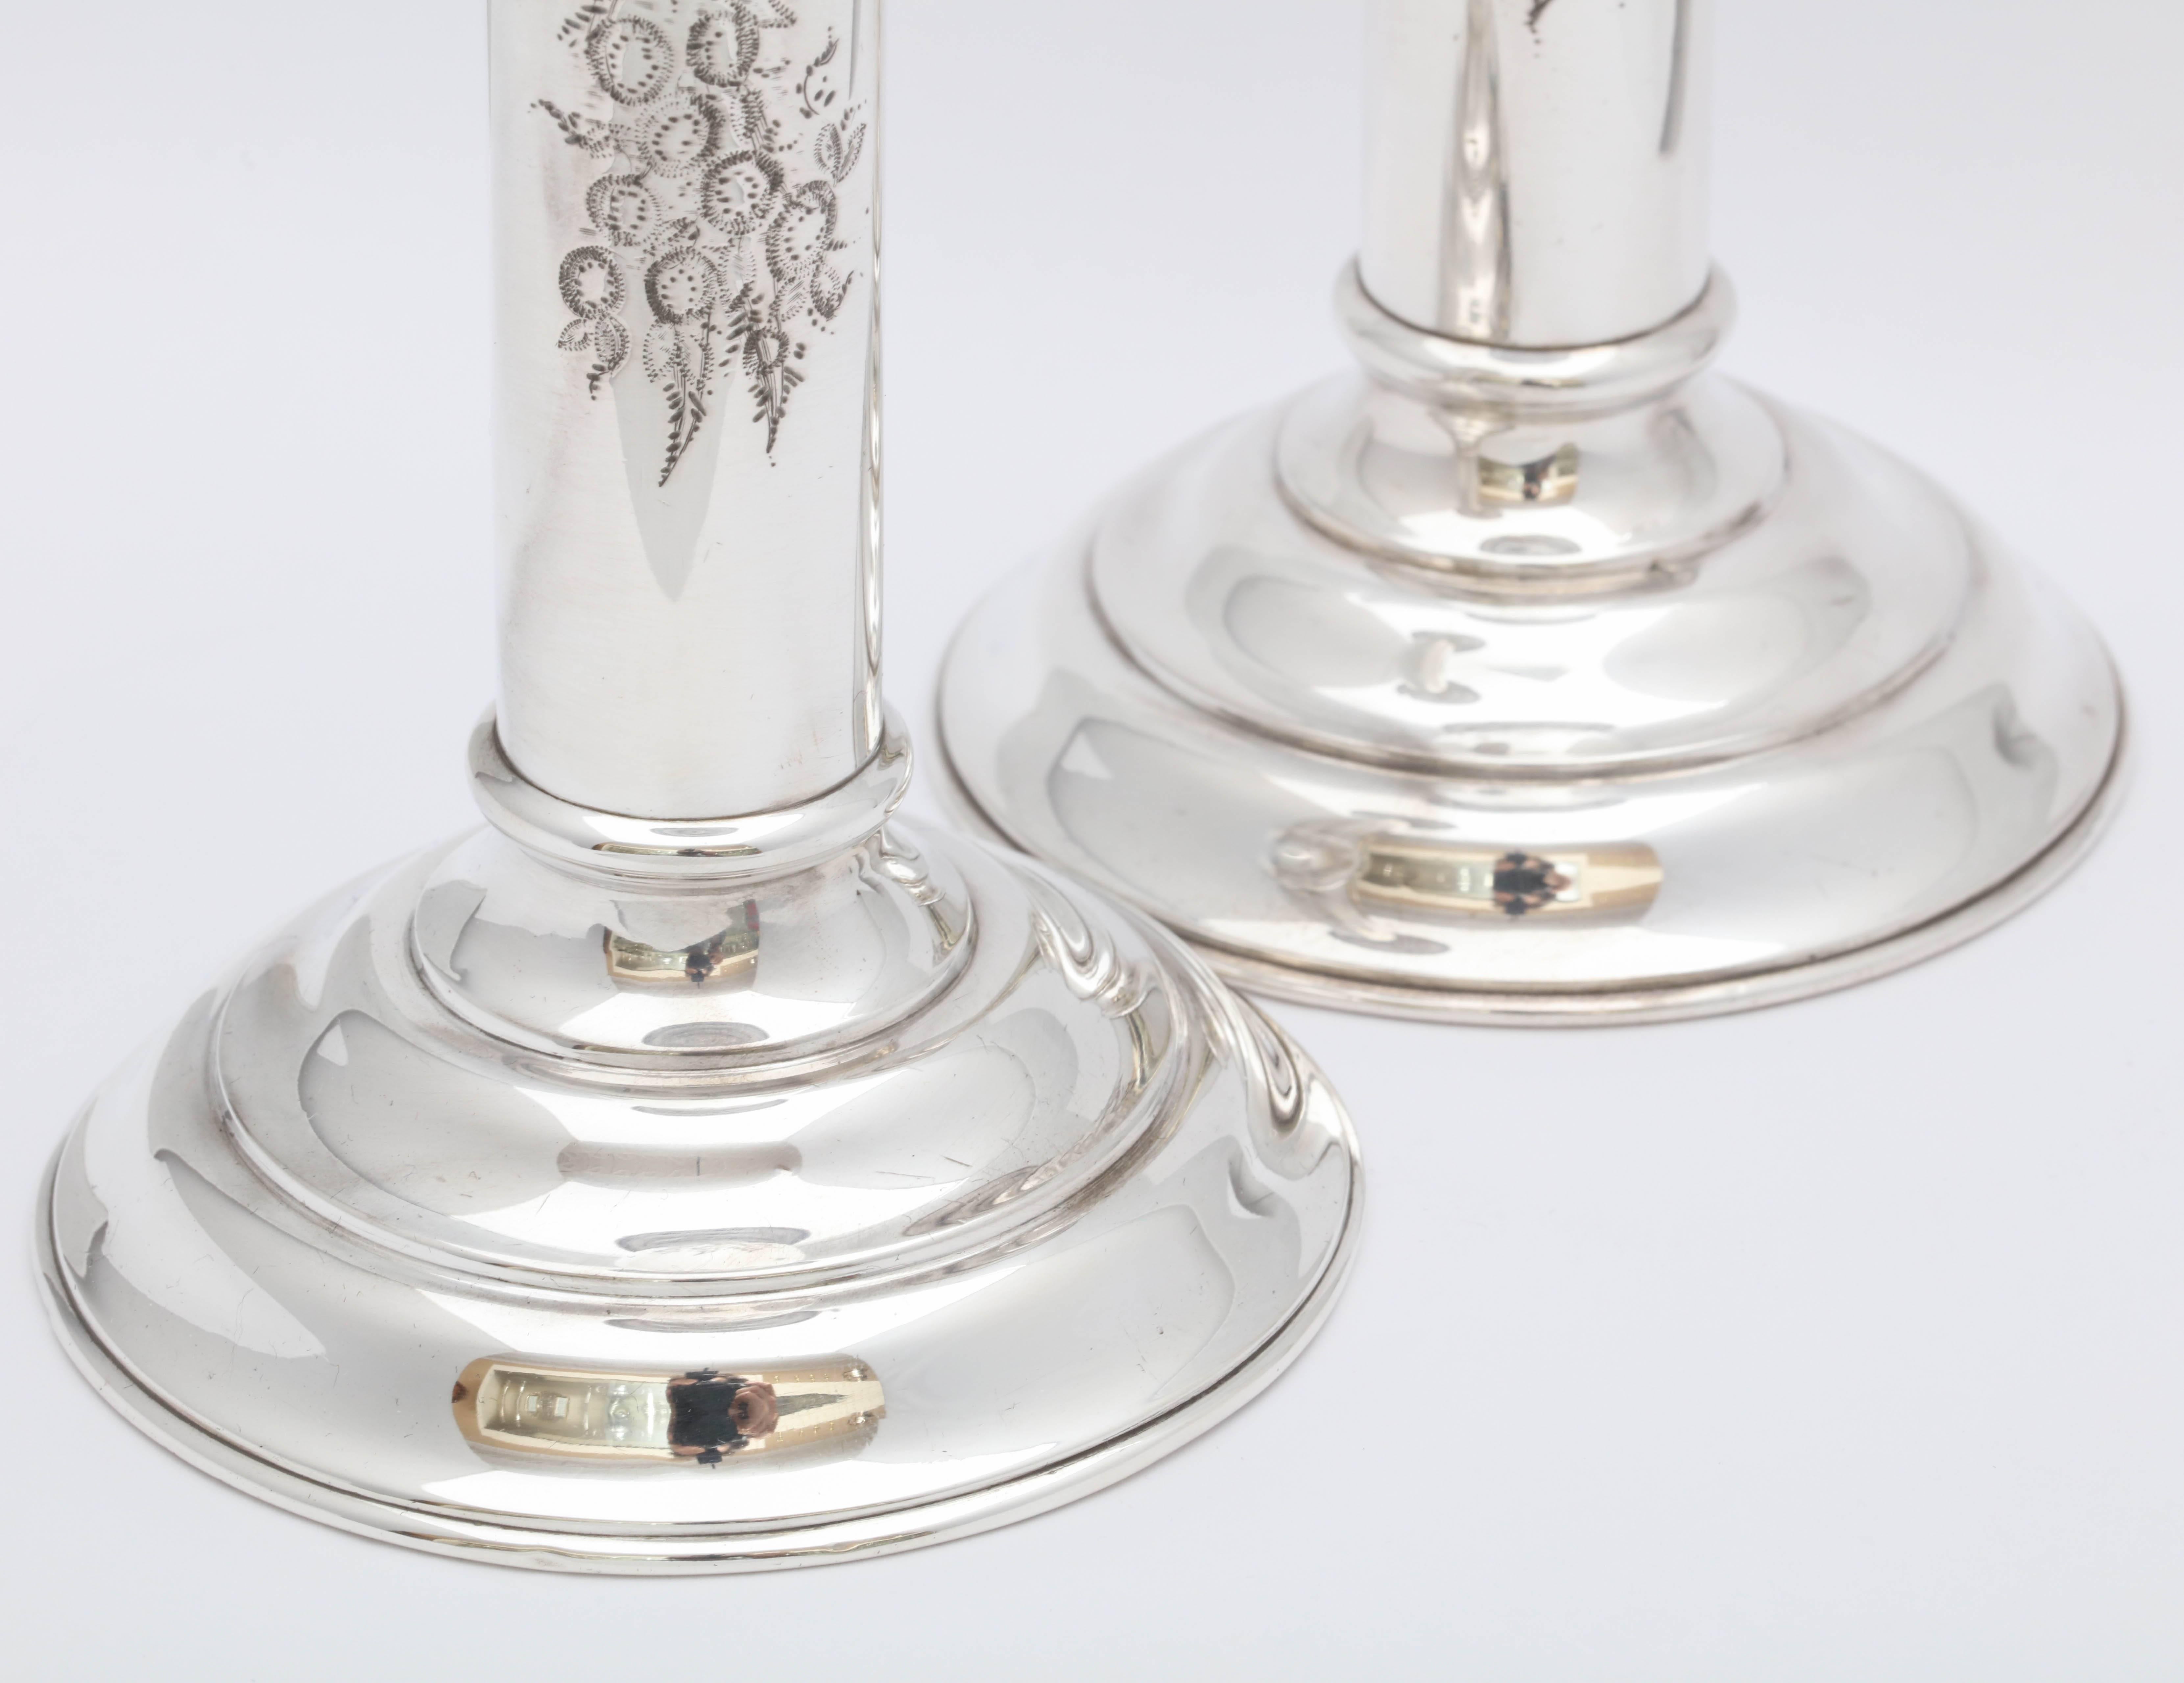 Pair of Edwardian Sterling Silver Column-Form Candlesticks 1